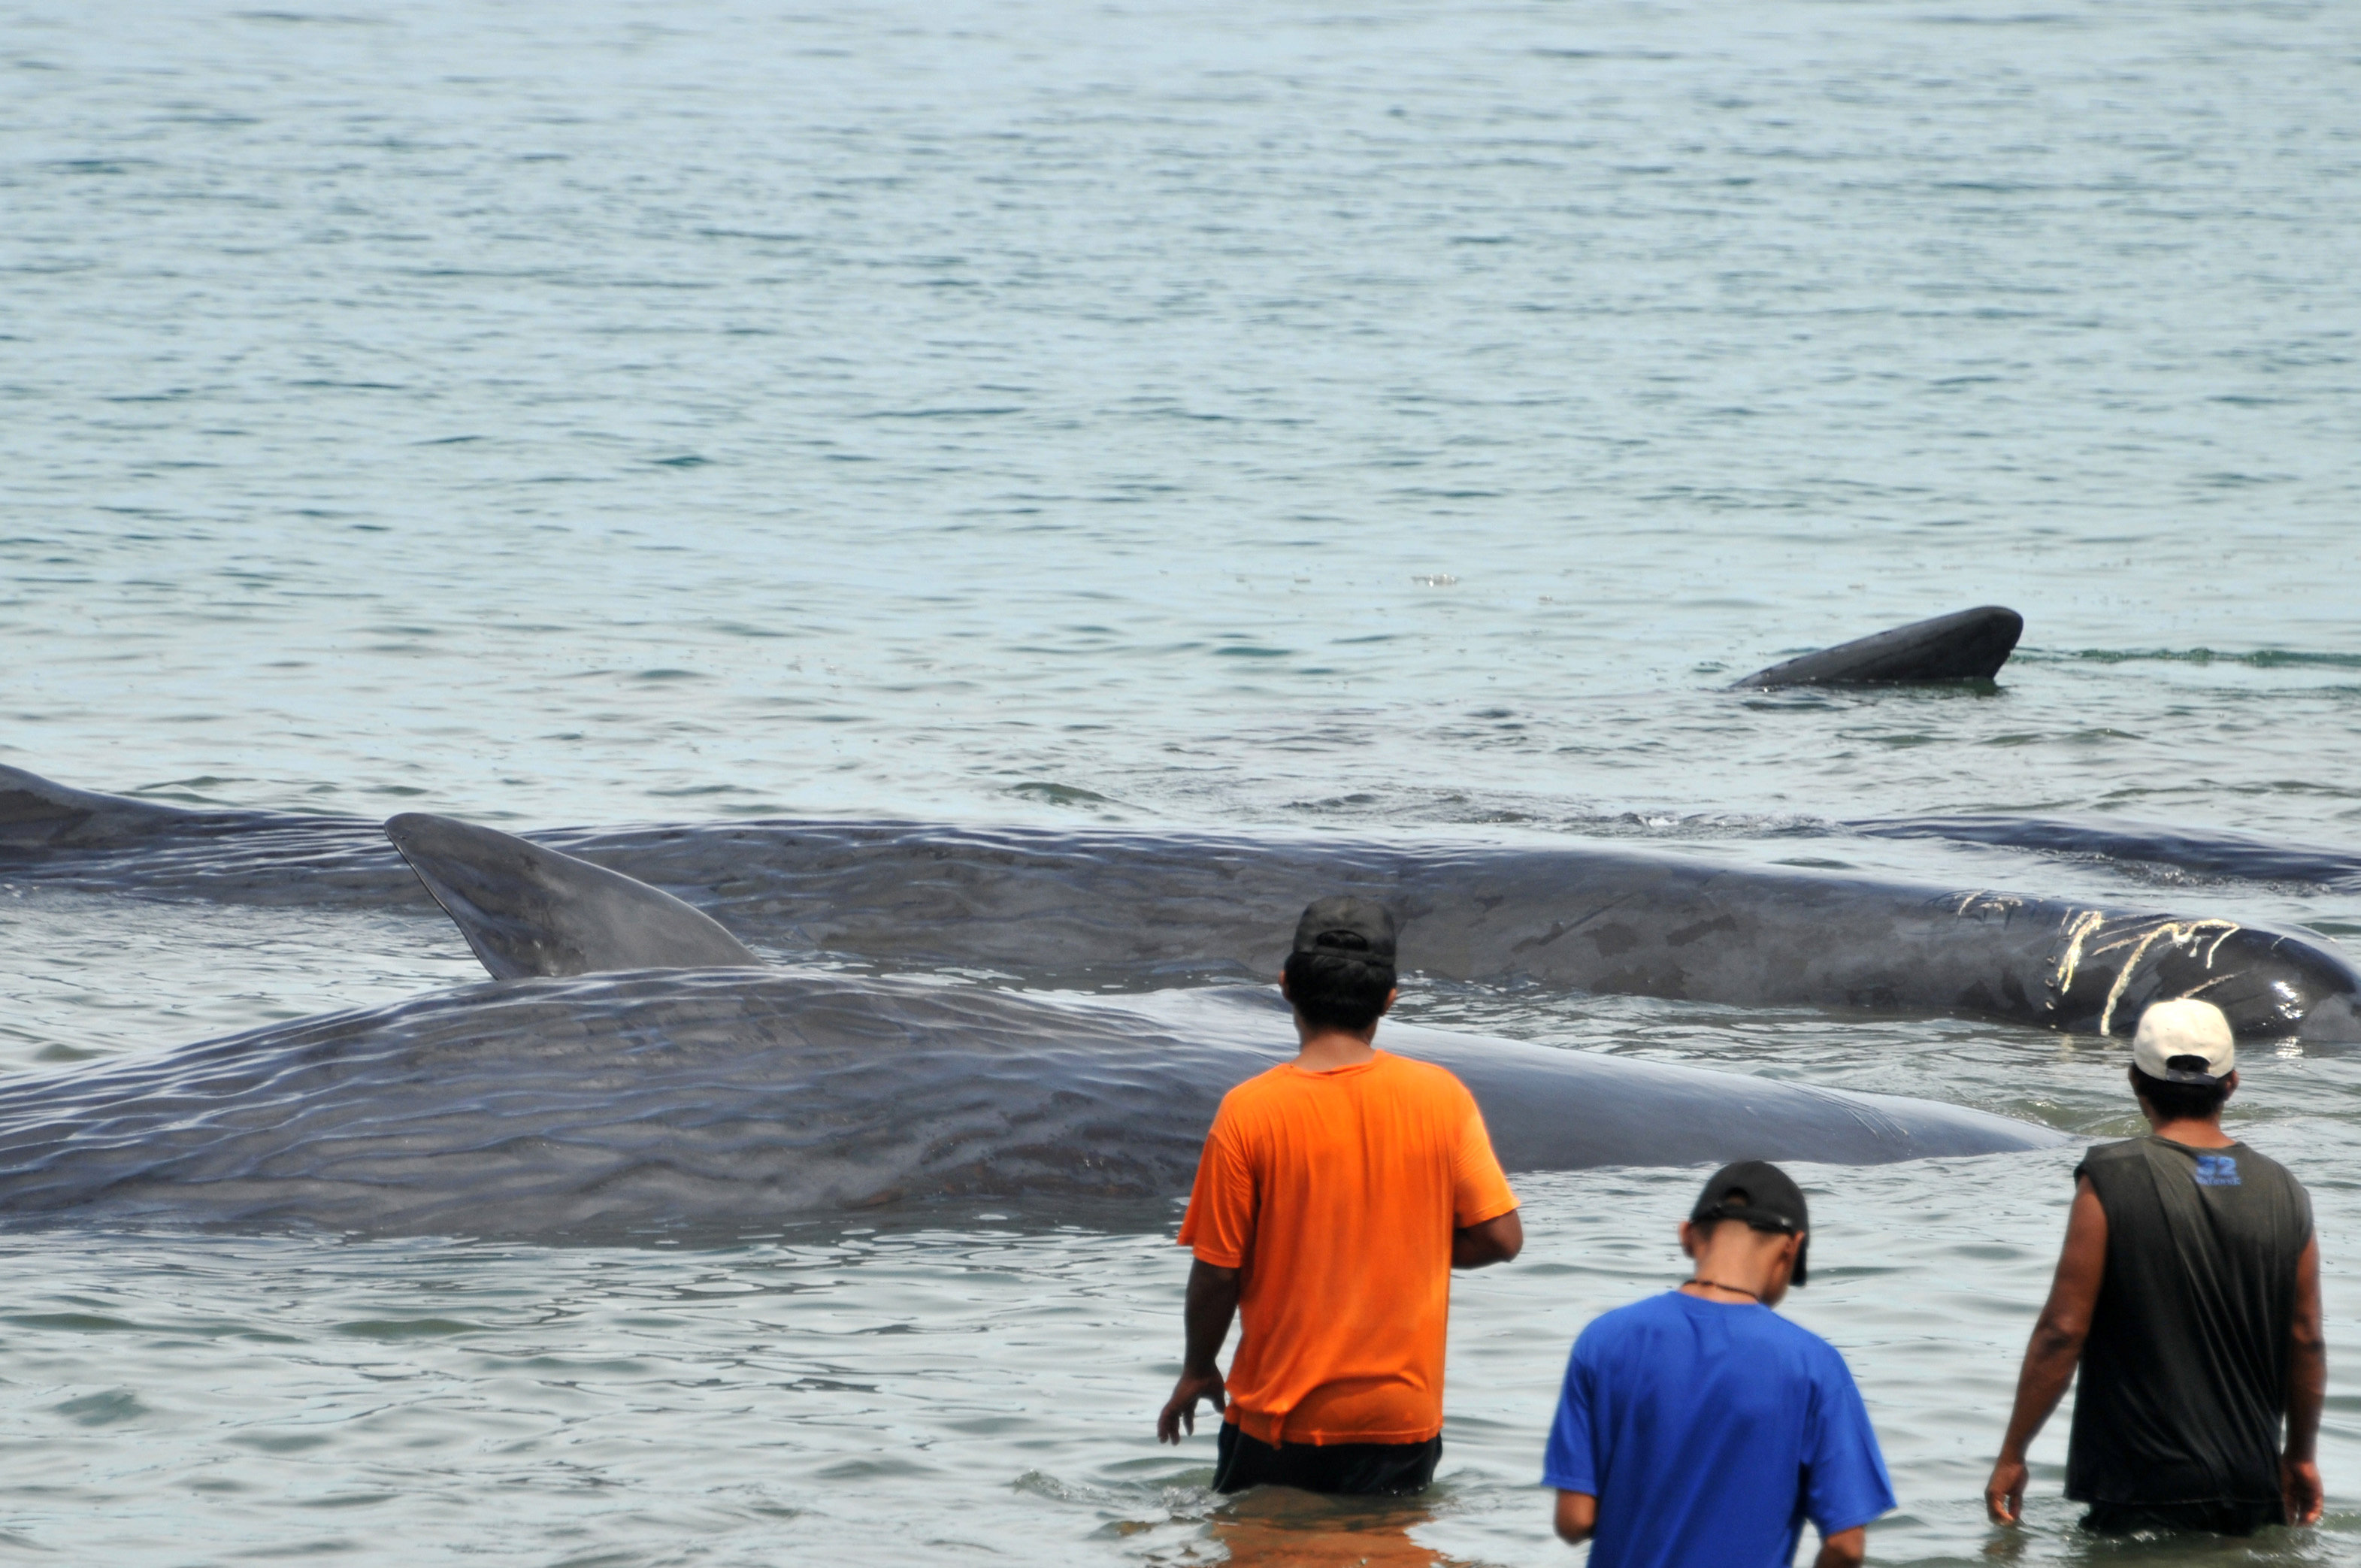 In pictures: Sperm whales beached on northern tip of Sumatra in Indonesia